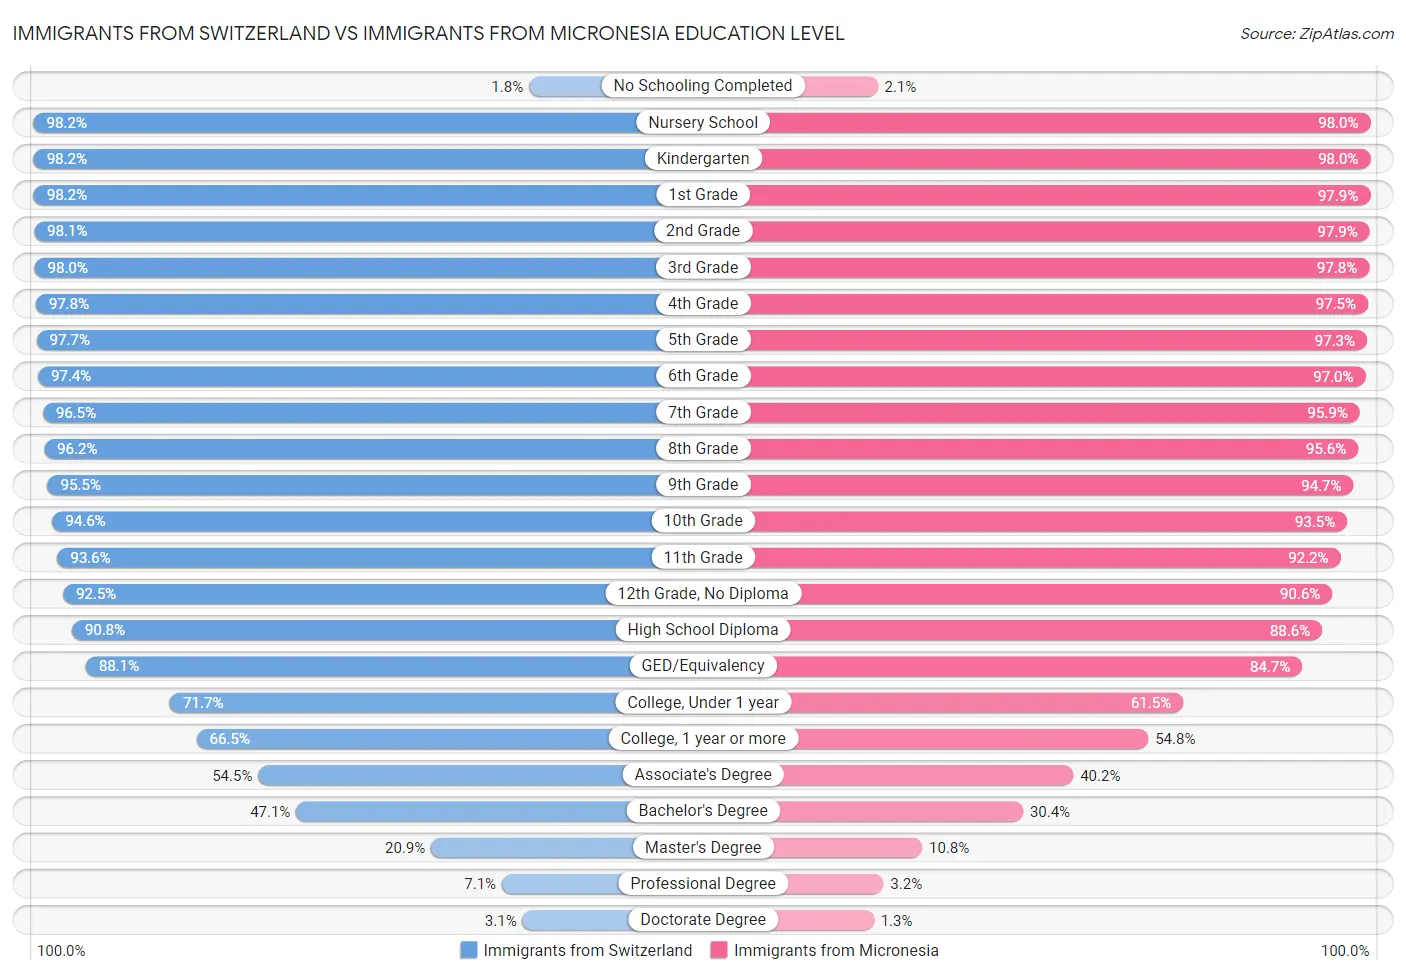 Immigrants from Switzerland vs Immigrants from Micronesia Education Level